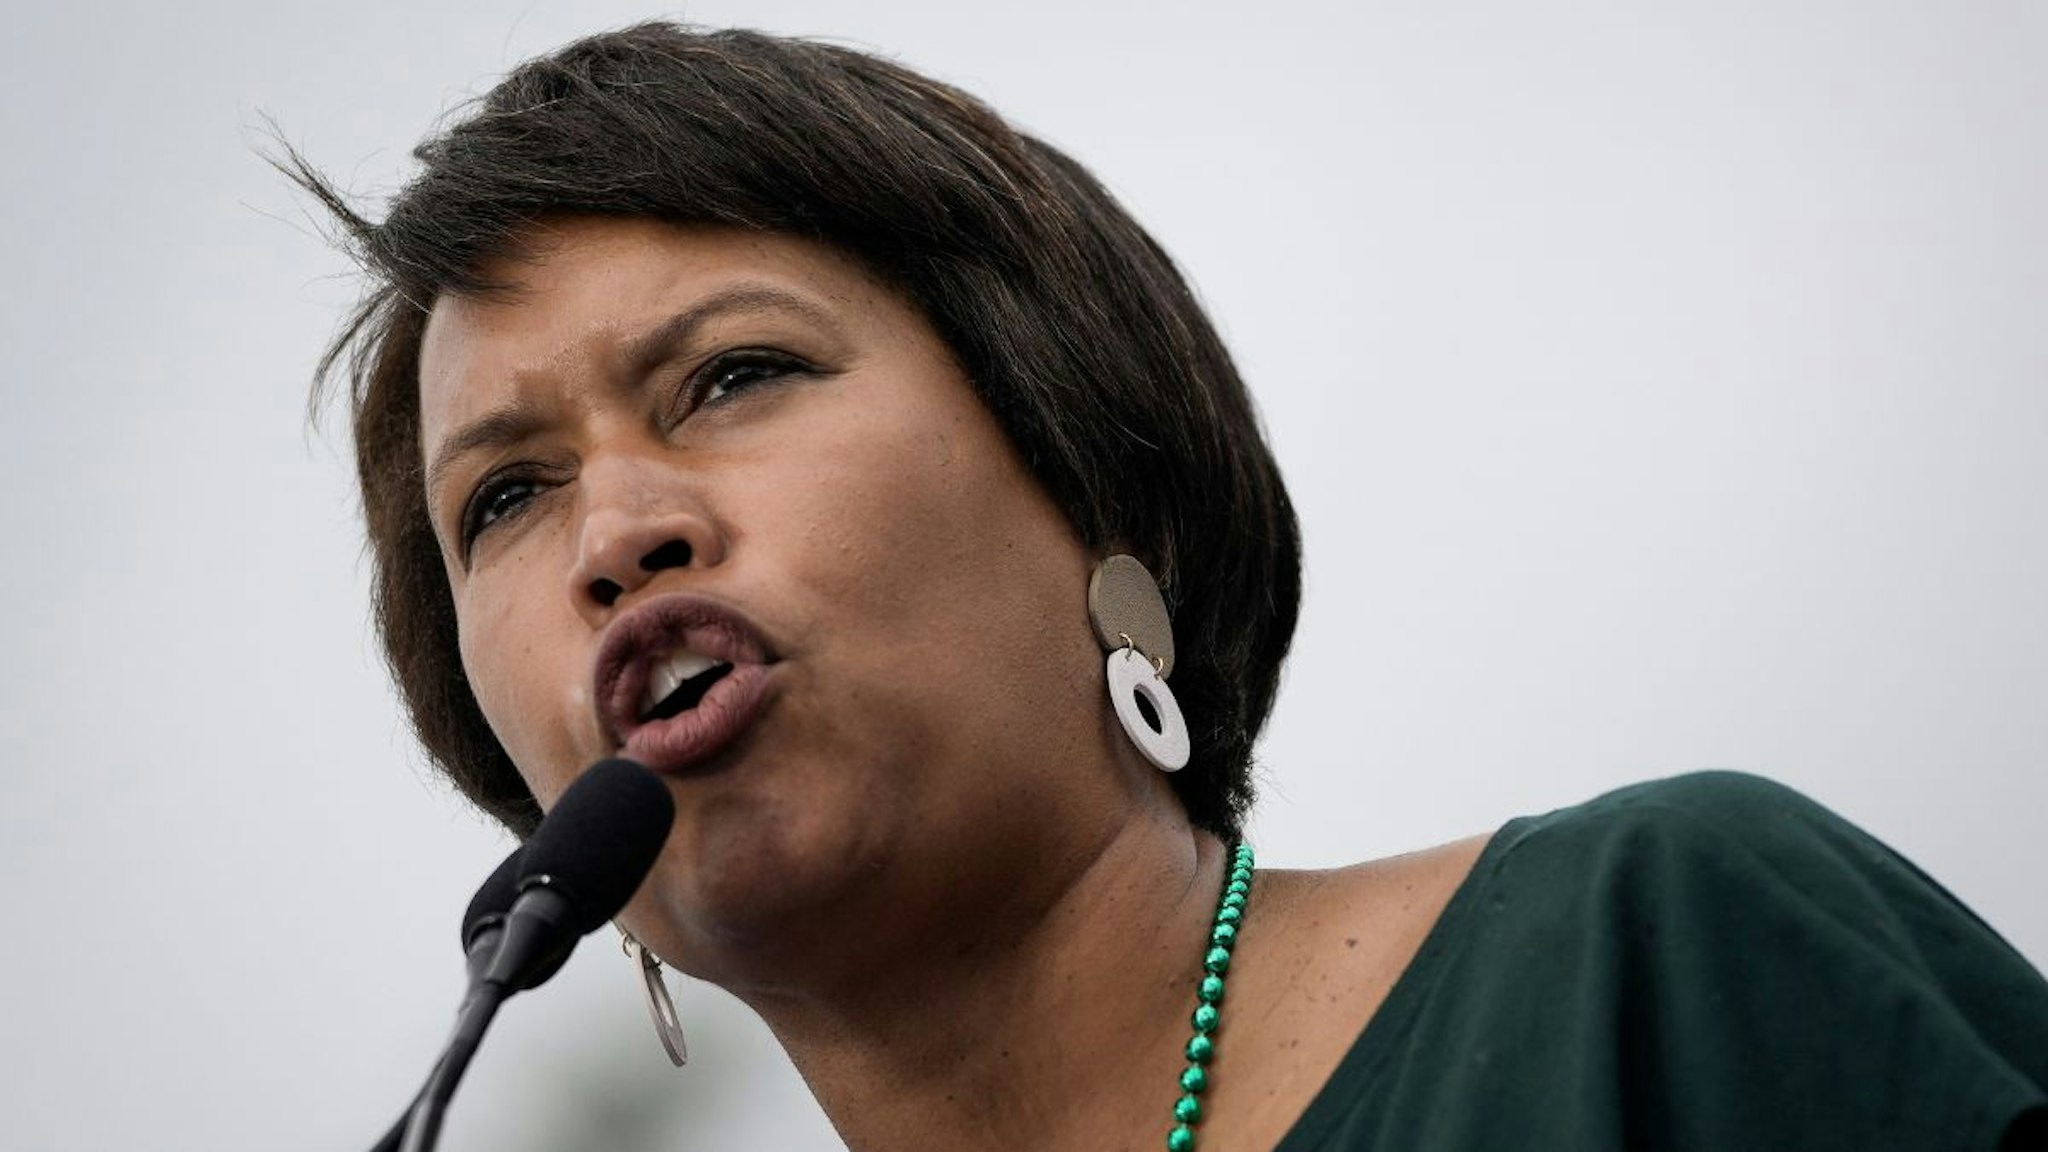 Washington DC Mayor Muriel Bowser speaks alongside gun control activists at the March for Our Lives rally against gun violence on the National Mall June 11, 2022 in Washington, DC.